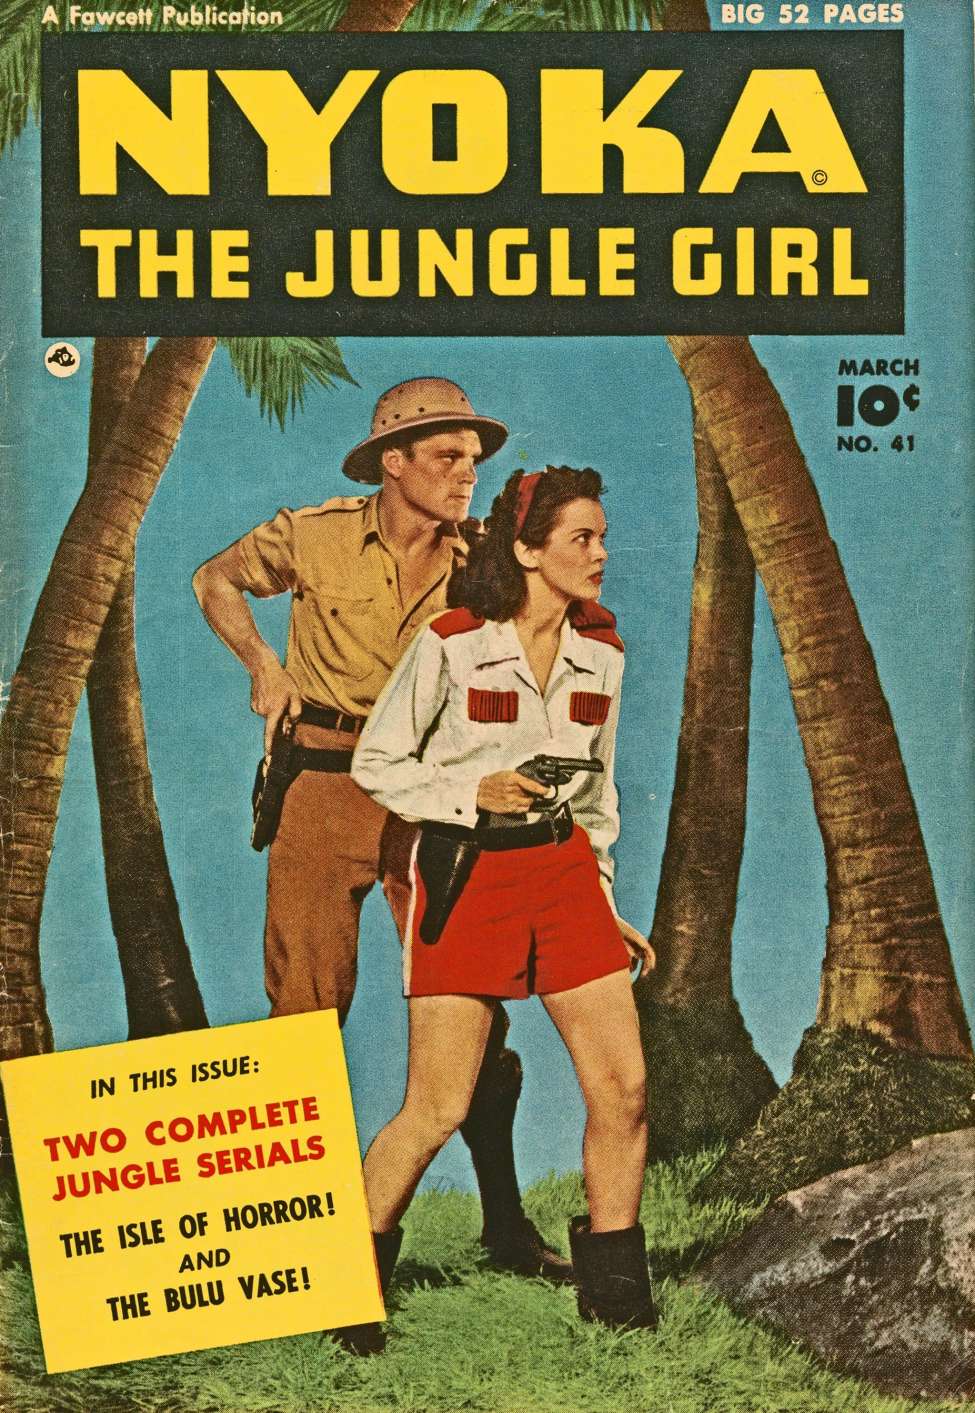 Book Cover For Nyoka the Jungle Girl 41 - Version 2